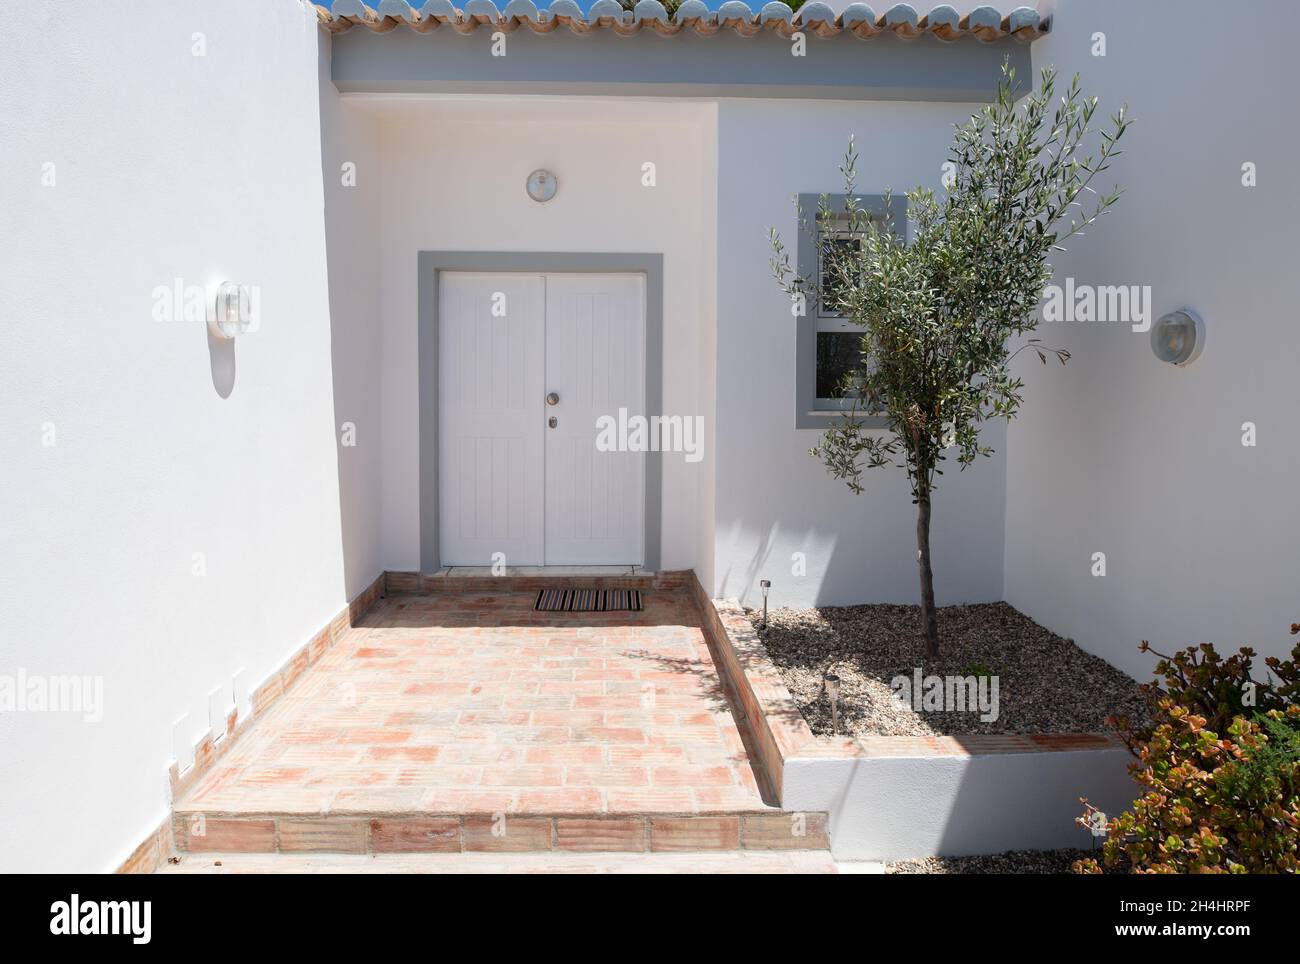 White front door and entrance to portuguese villa Stock Photo